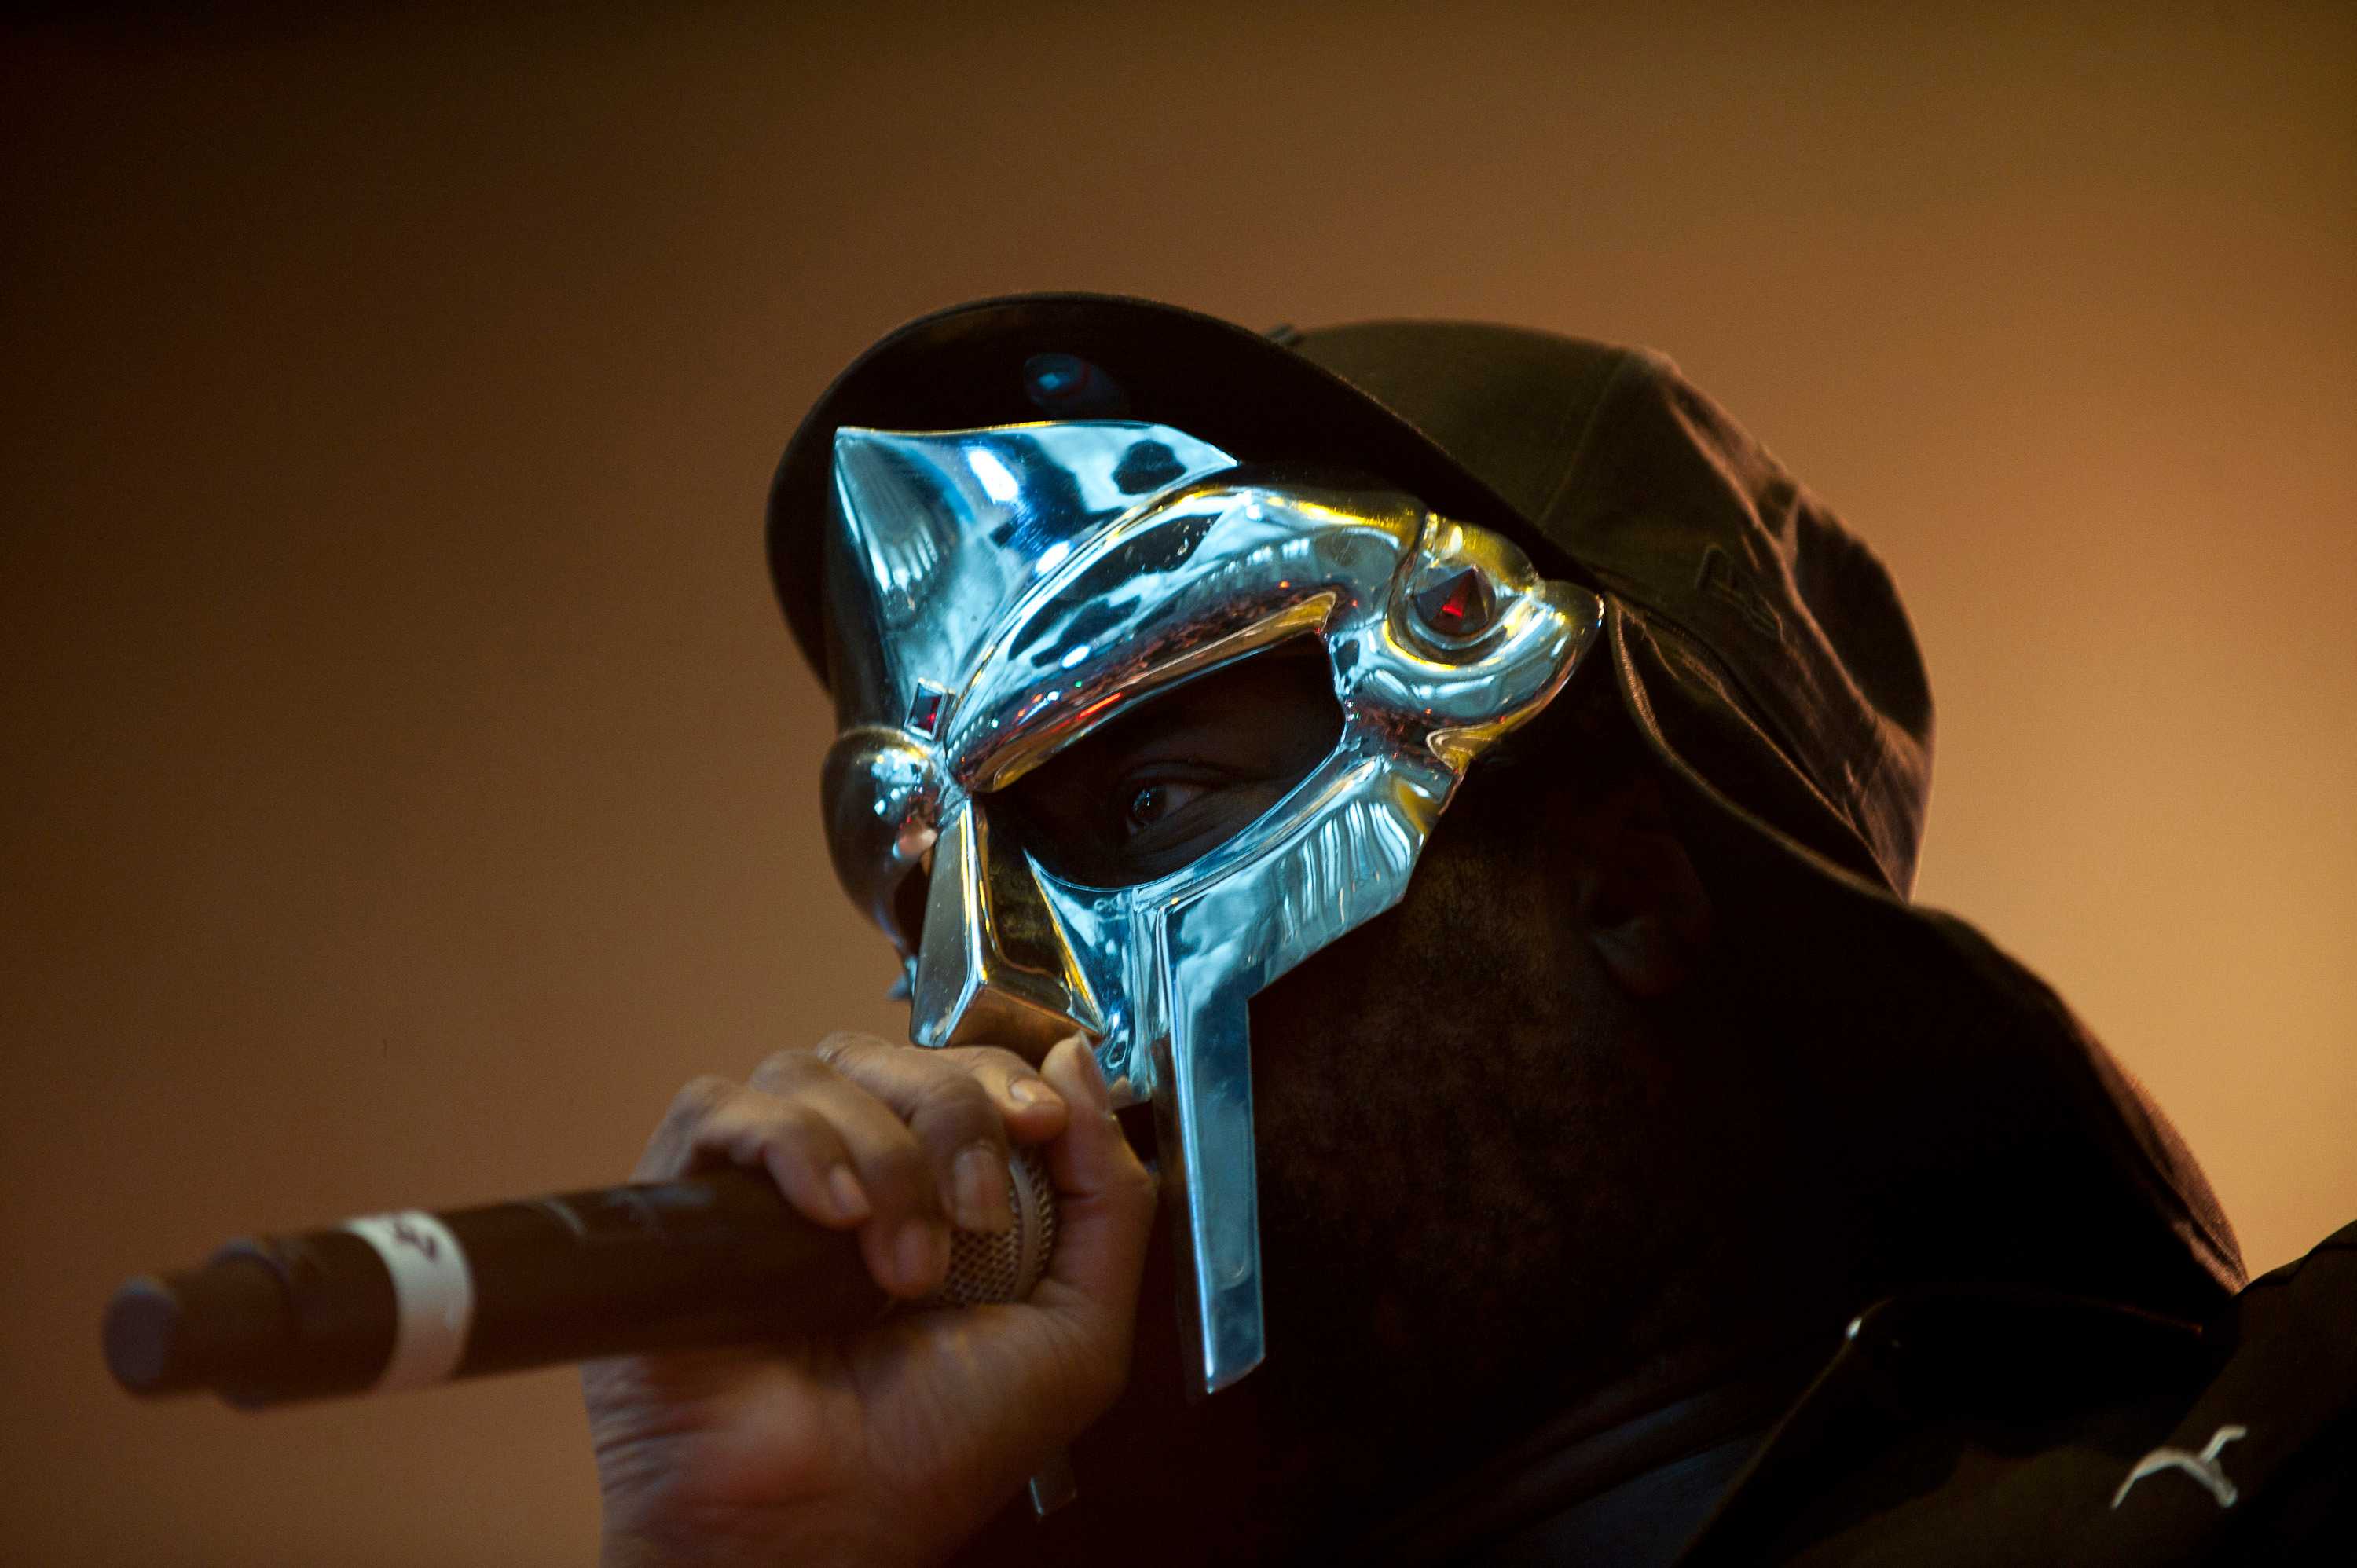 MF DOOM preforming a sliver plated mask that is covering most of his face. He is rapping into a microphone.